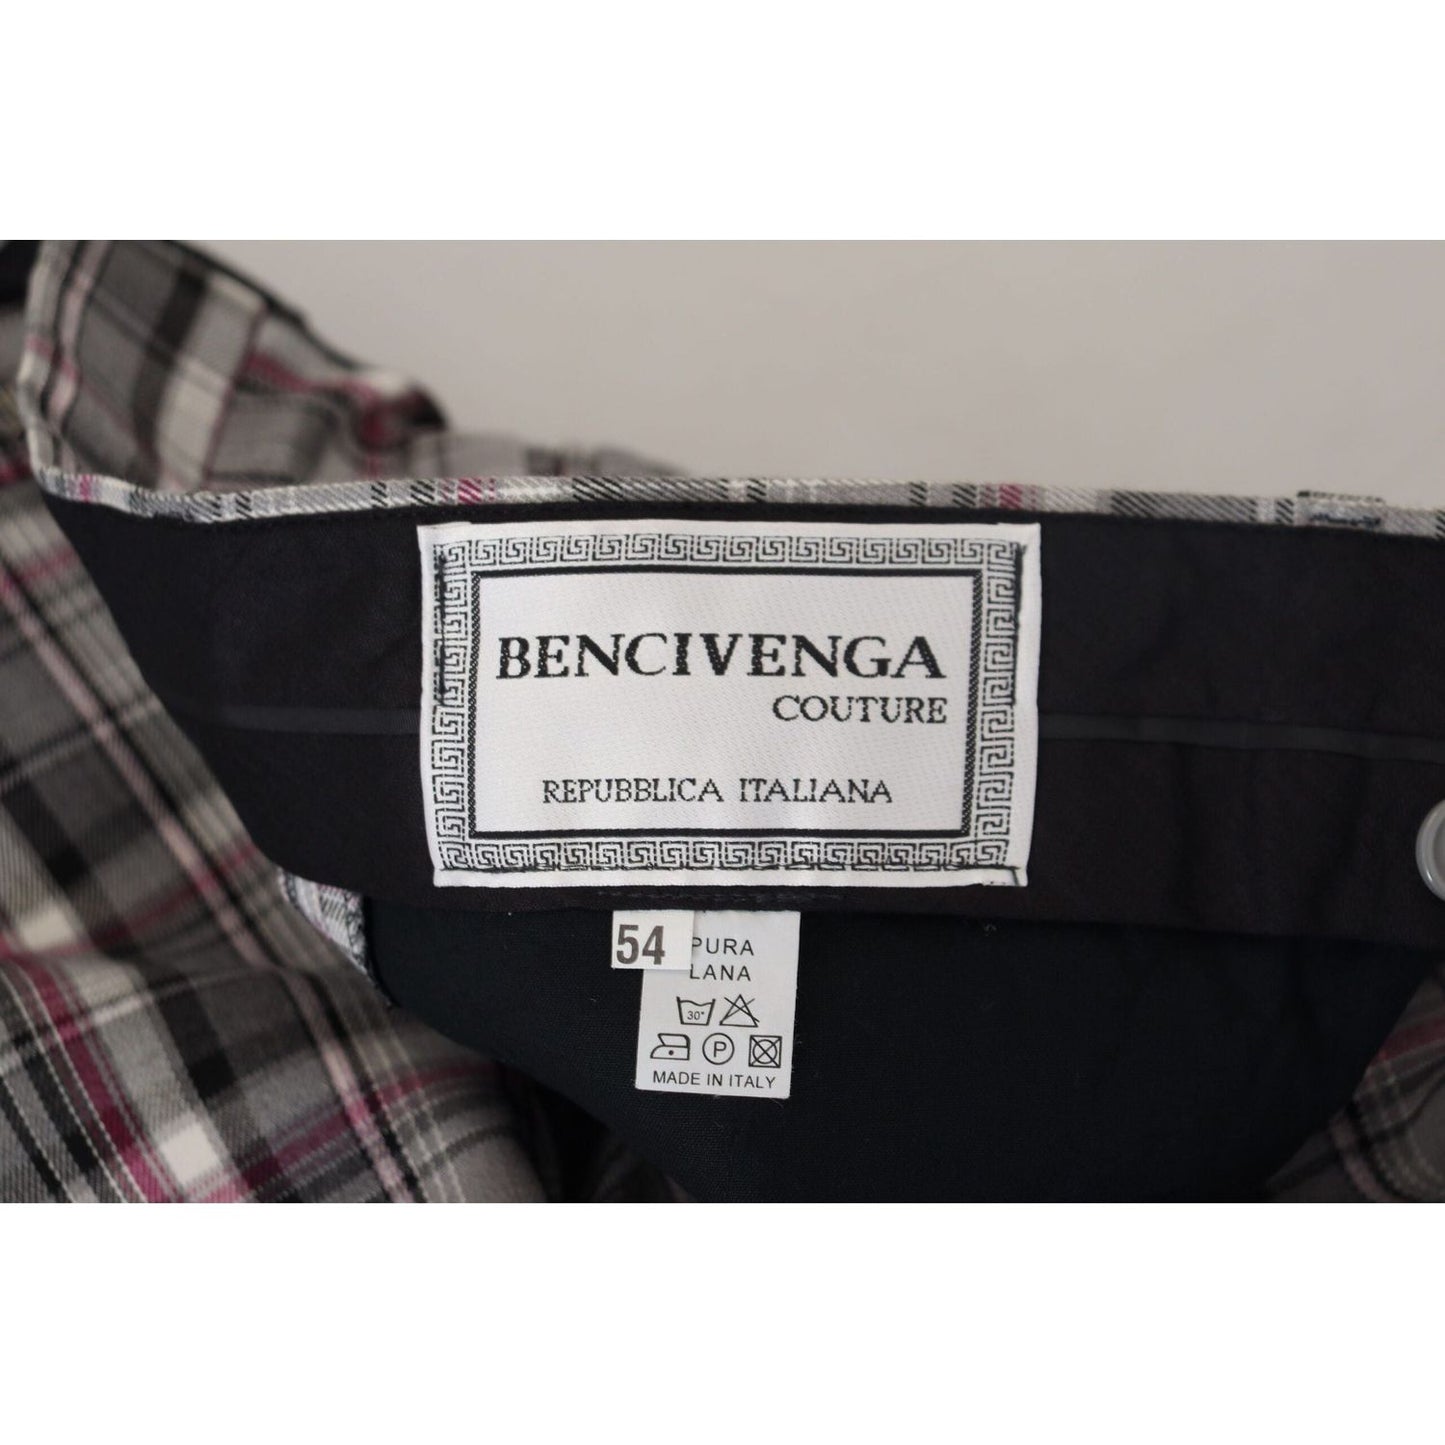 BENCIVENGA Checkered Couture Chino Pants for Men multicolor-checkered-men-pants